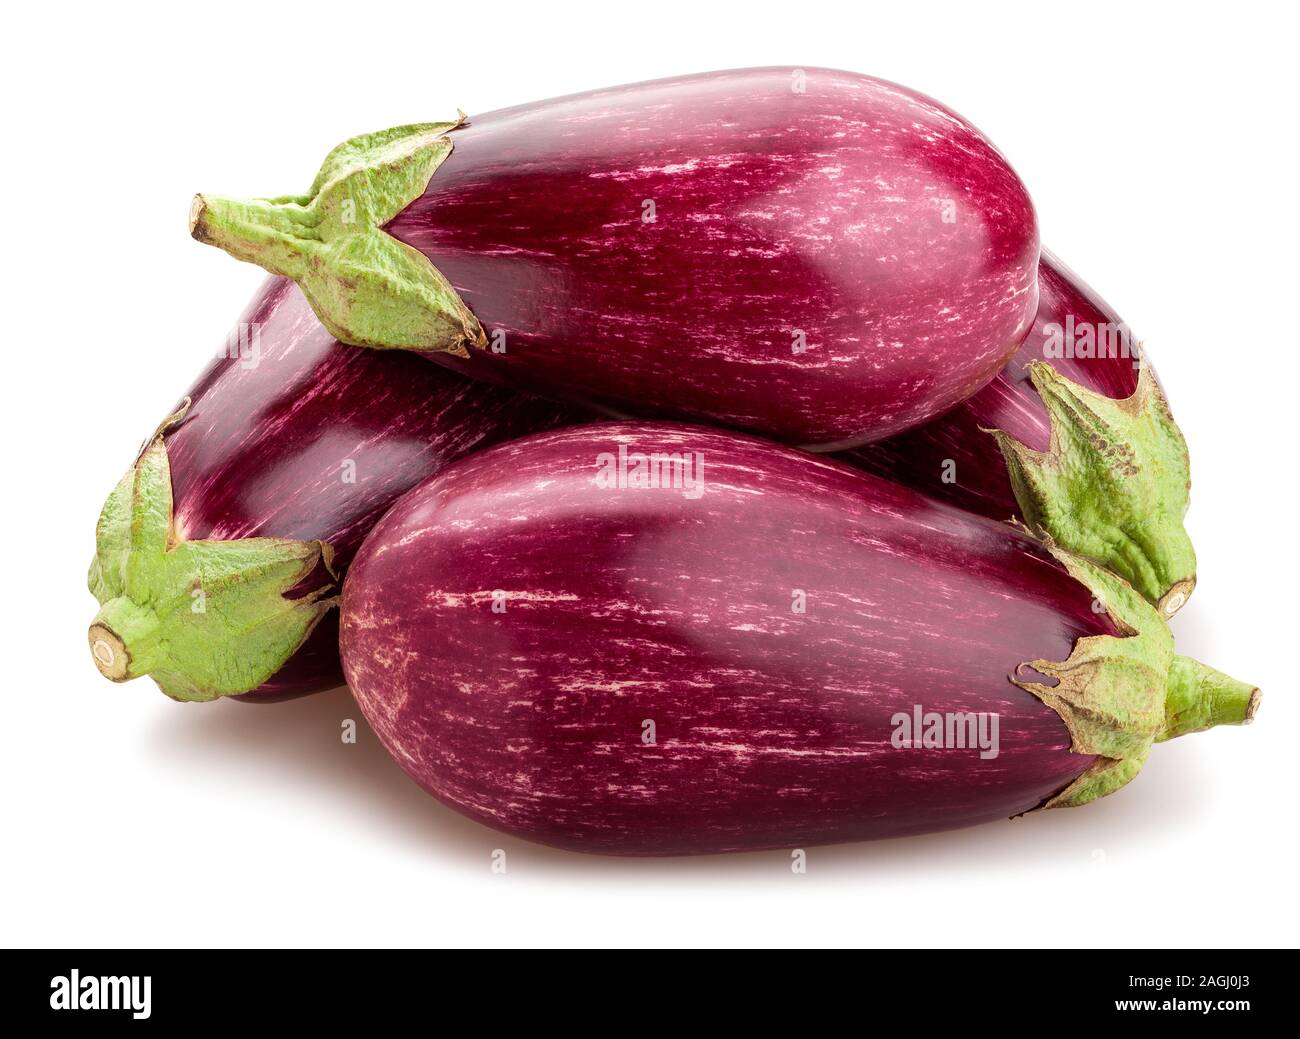 En chemin aubergine isolated on white Banque D'Images